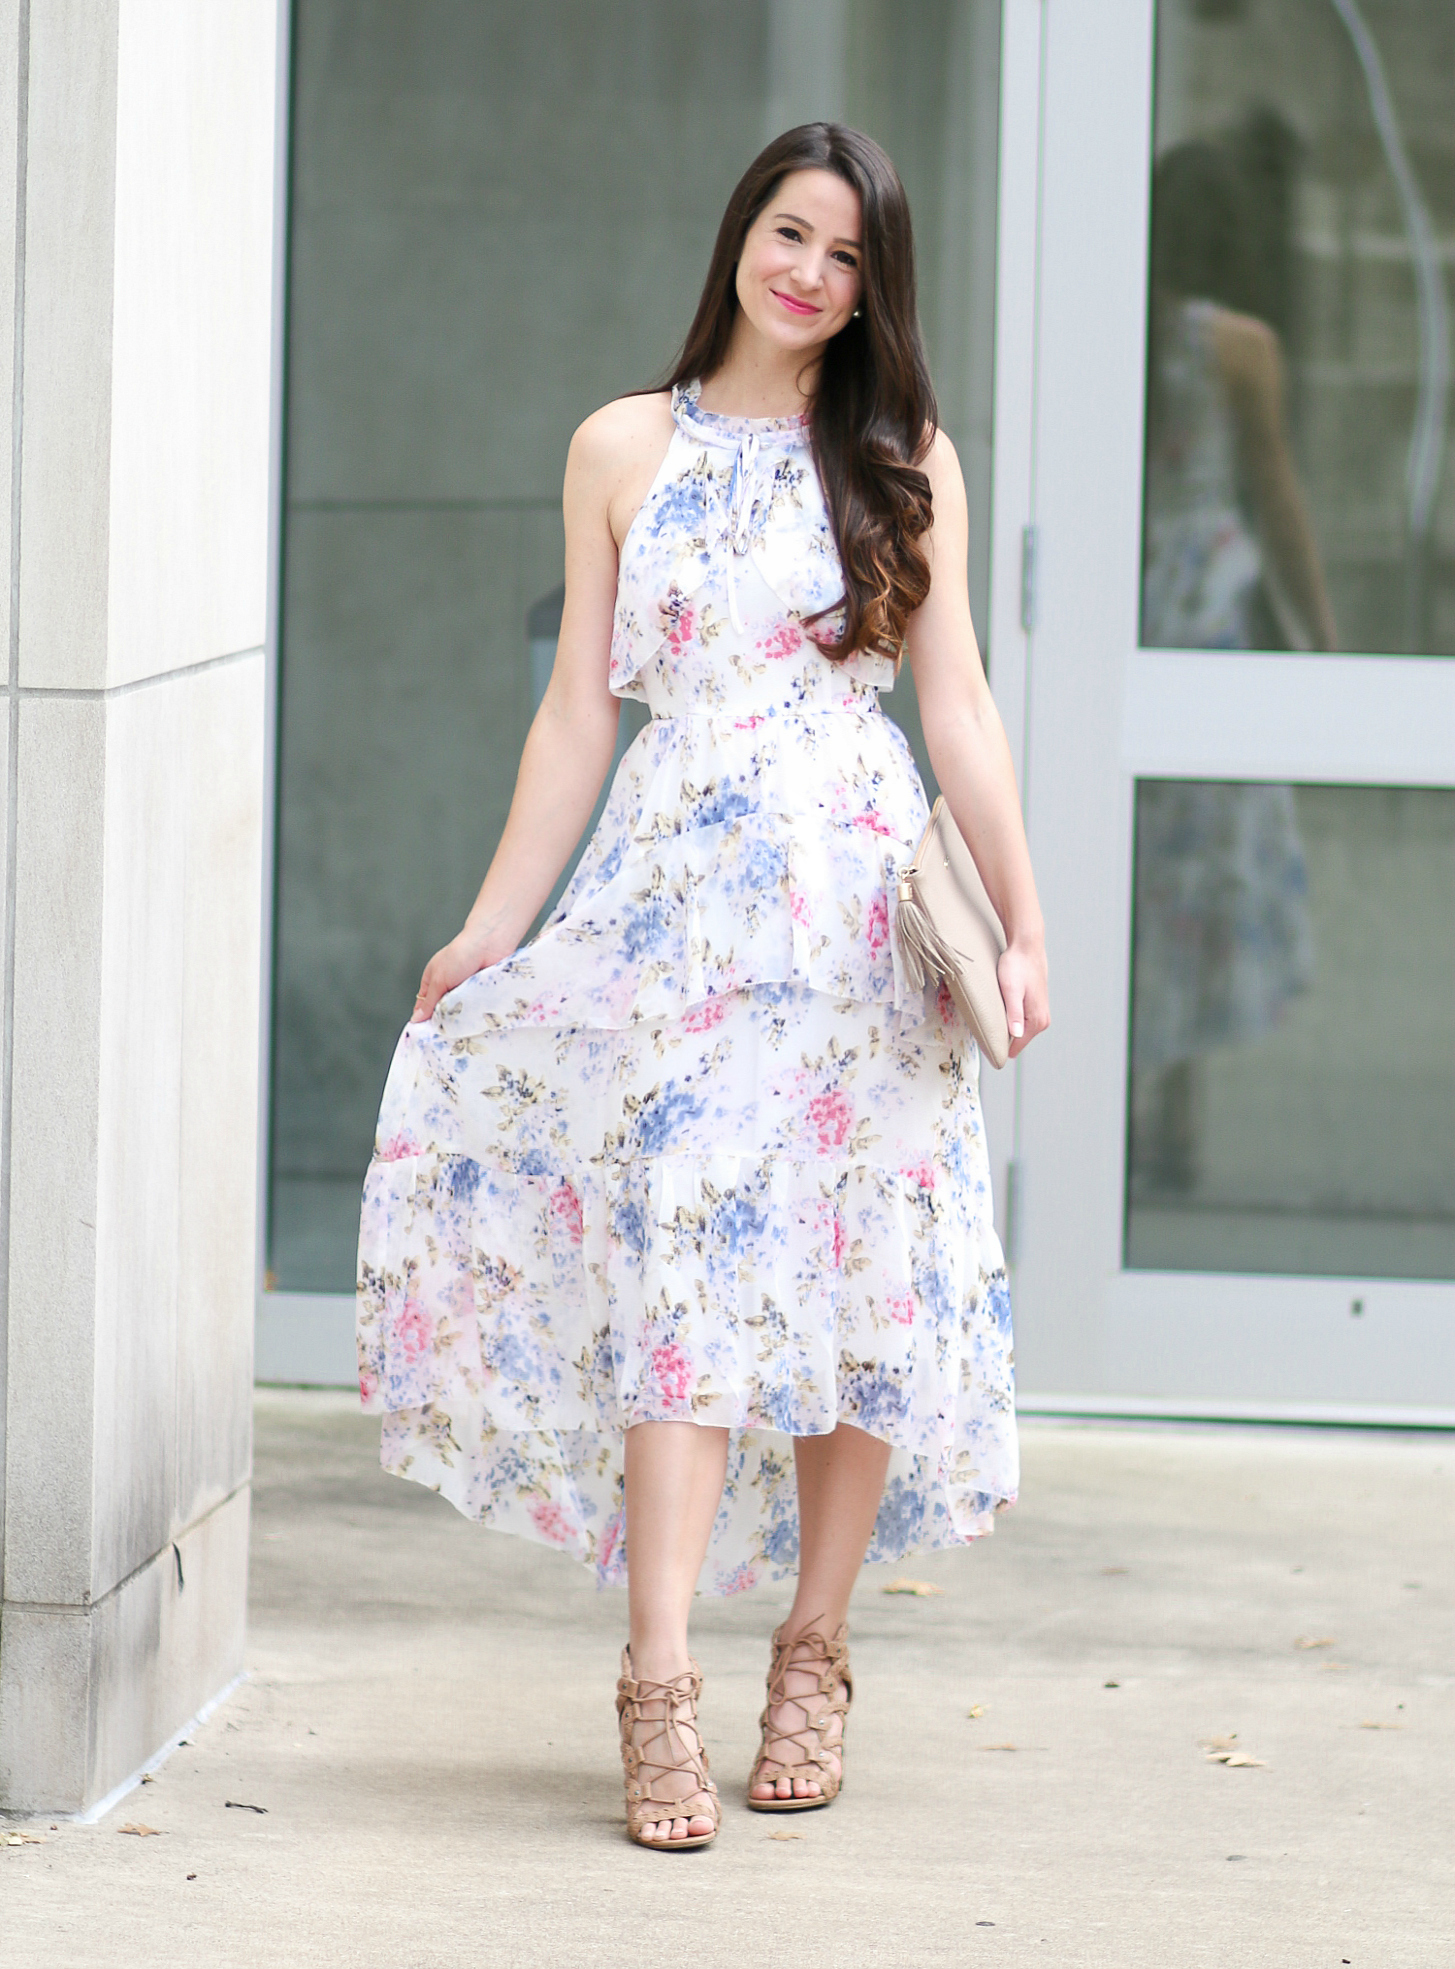 Wearing White to a Wedding: After Market Floral Chiffon Maxi Dress